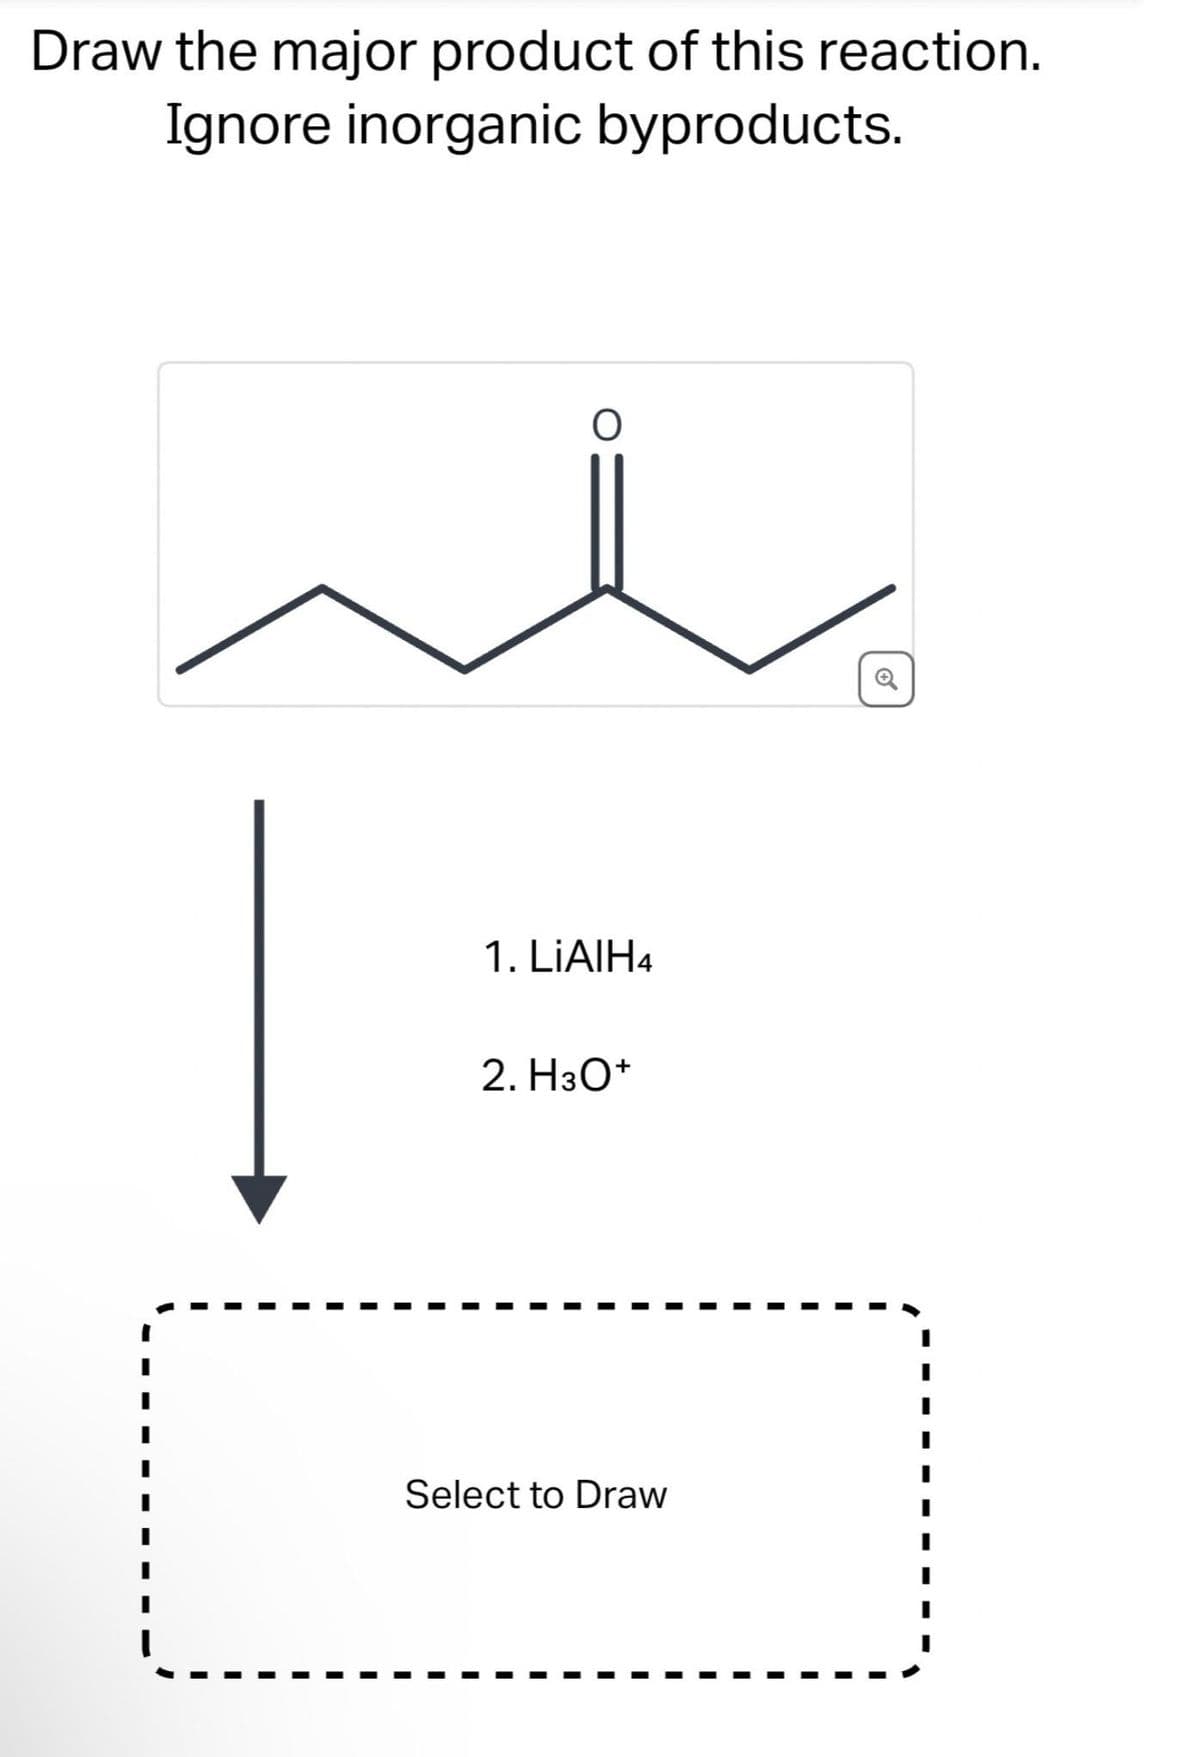 Draw the major product of this reaction.
Ignore inorganic byproducts.
O
1. LiAlH4
2. H3O+
Select to Draw